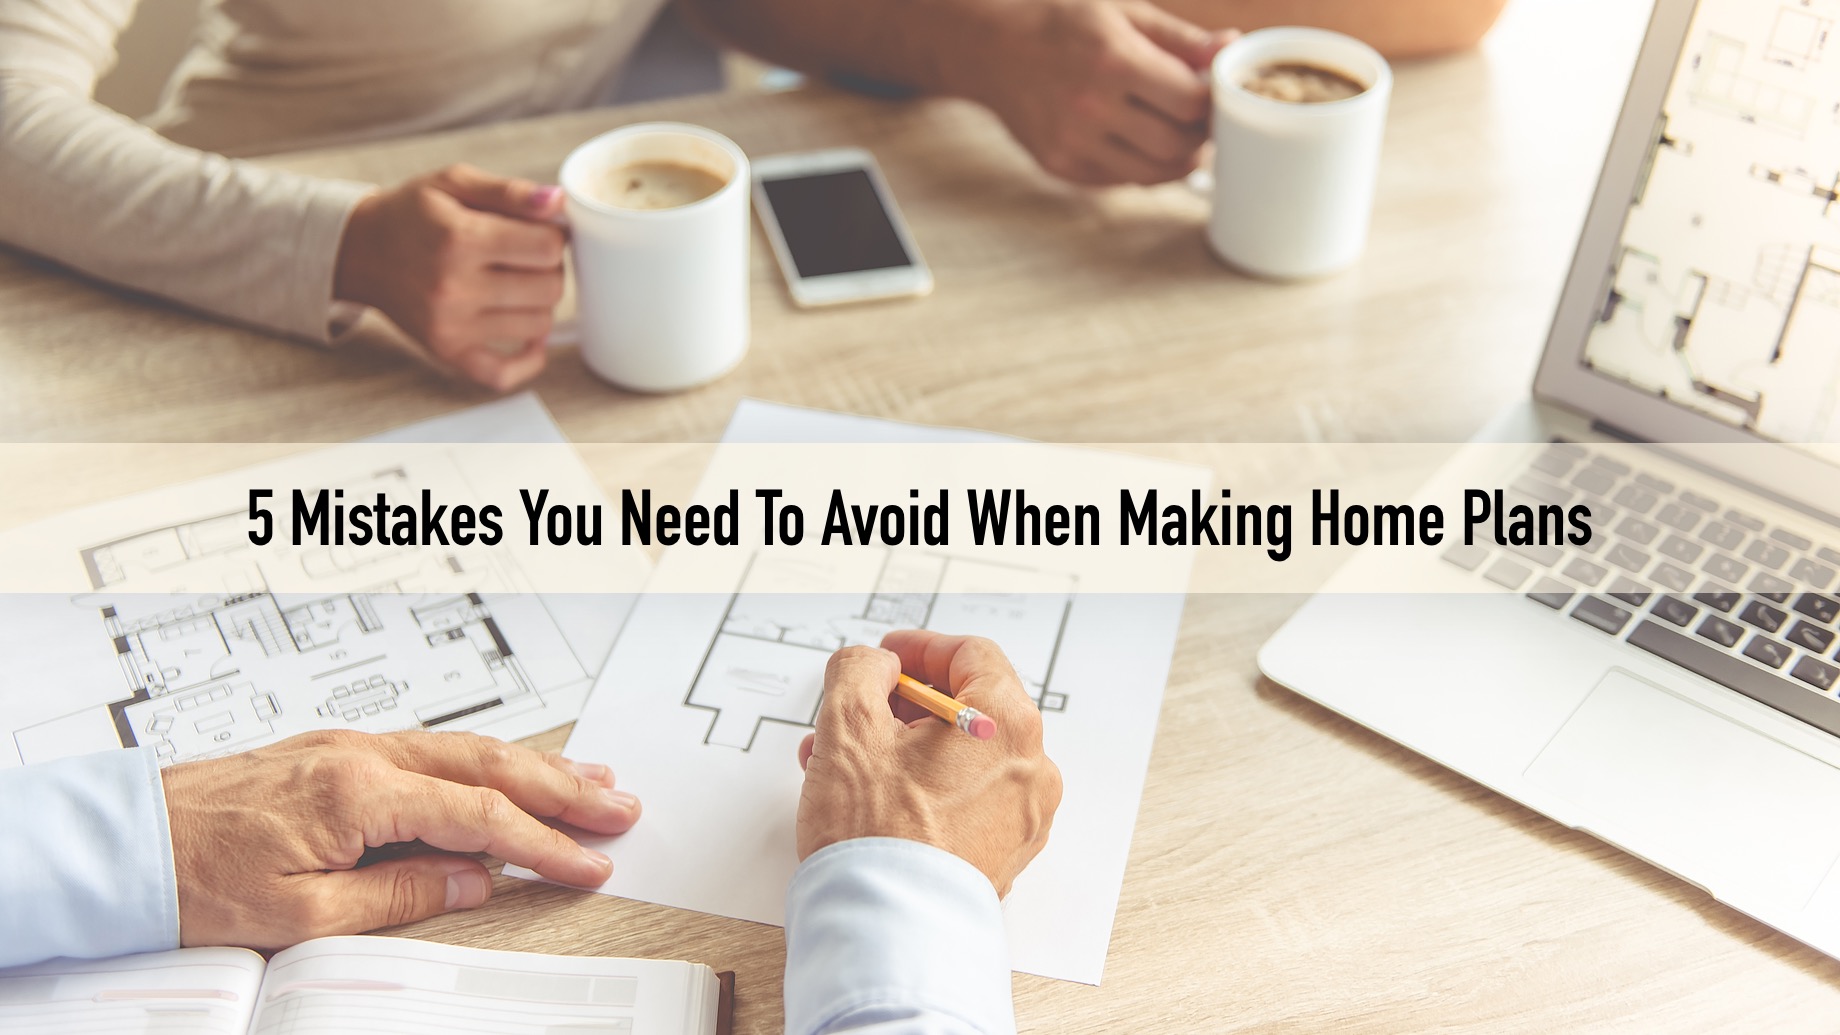 5 Mistakes You Need To Avoid When Making Home Plans